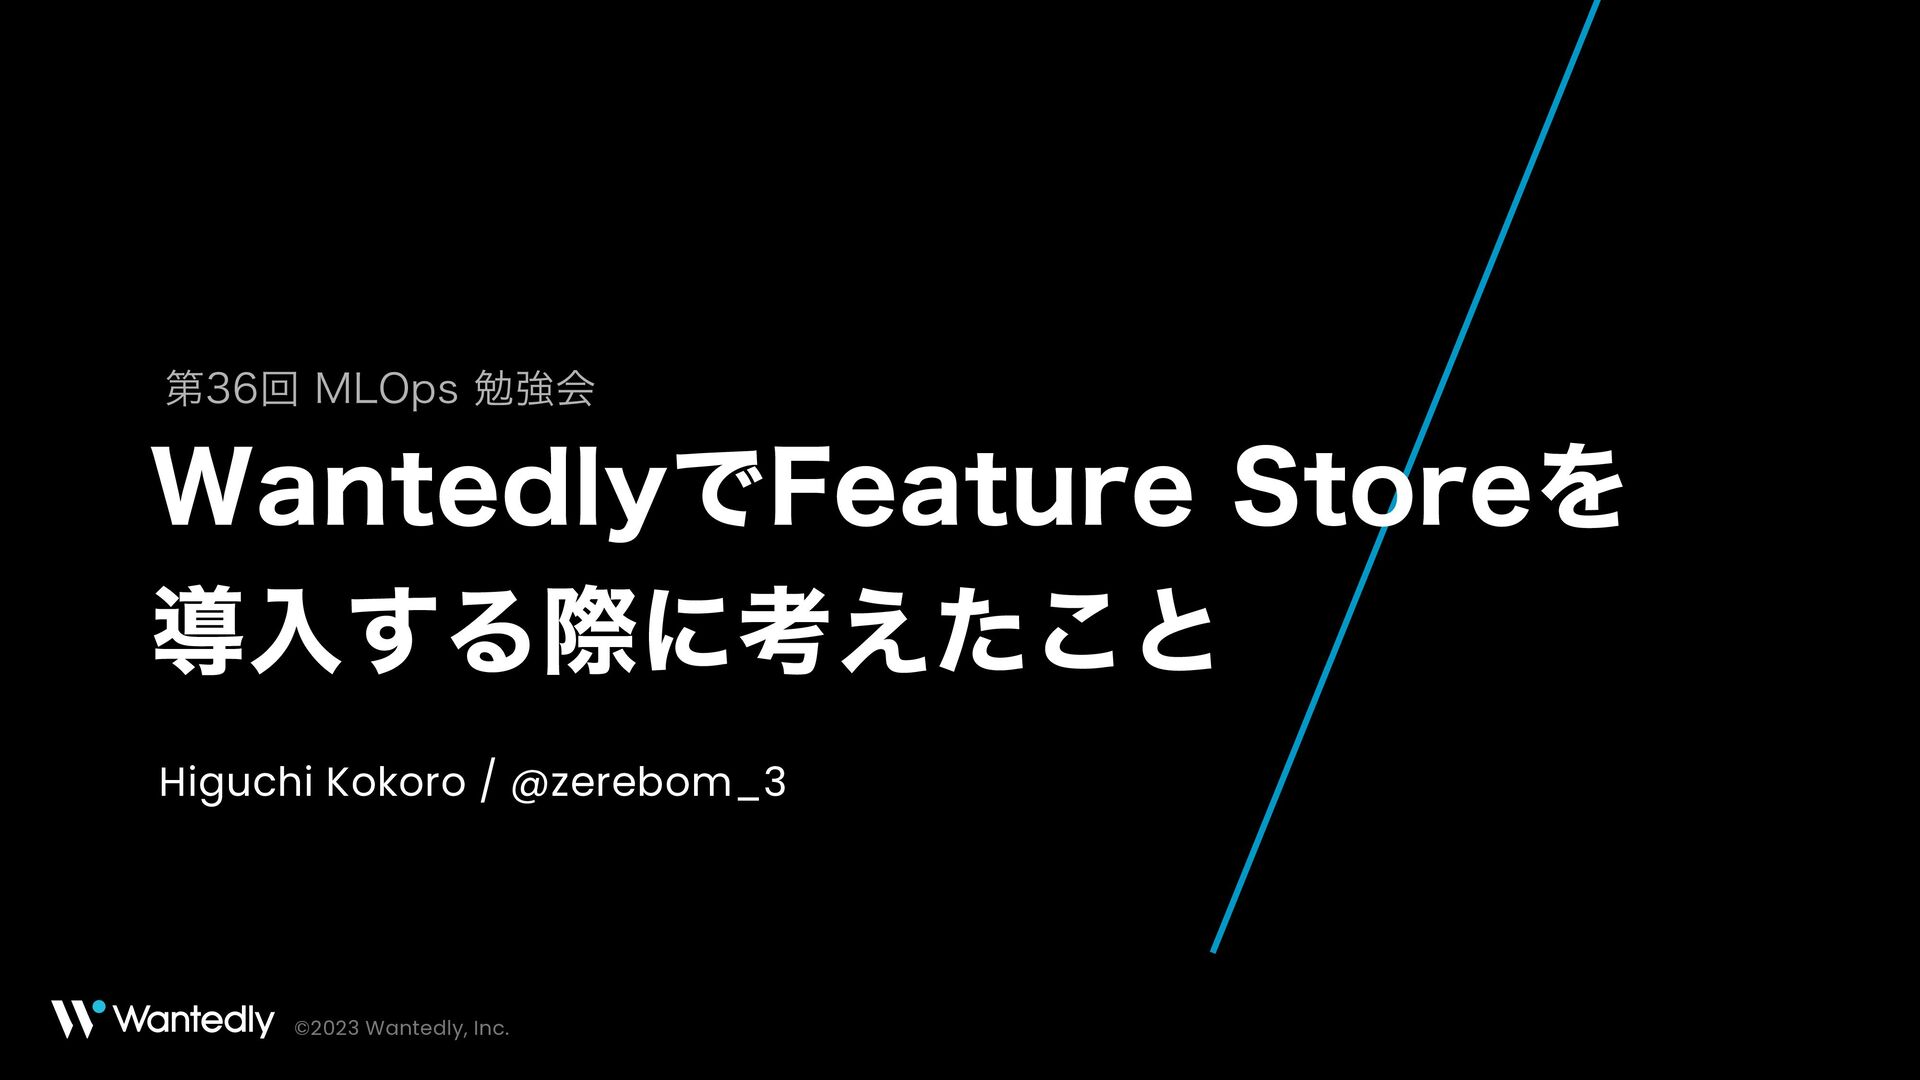 WantedlyでFeature Storeを導入する際に考えたこと